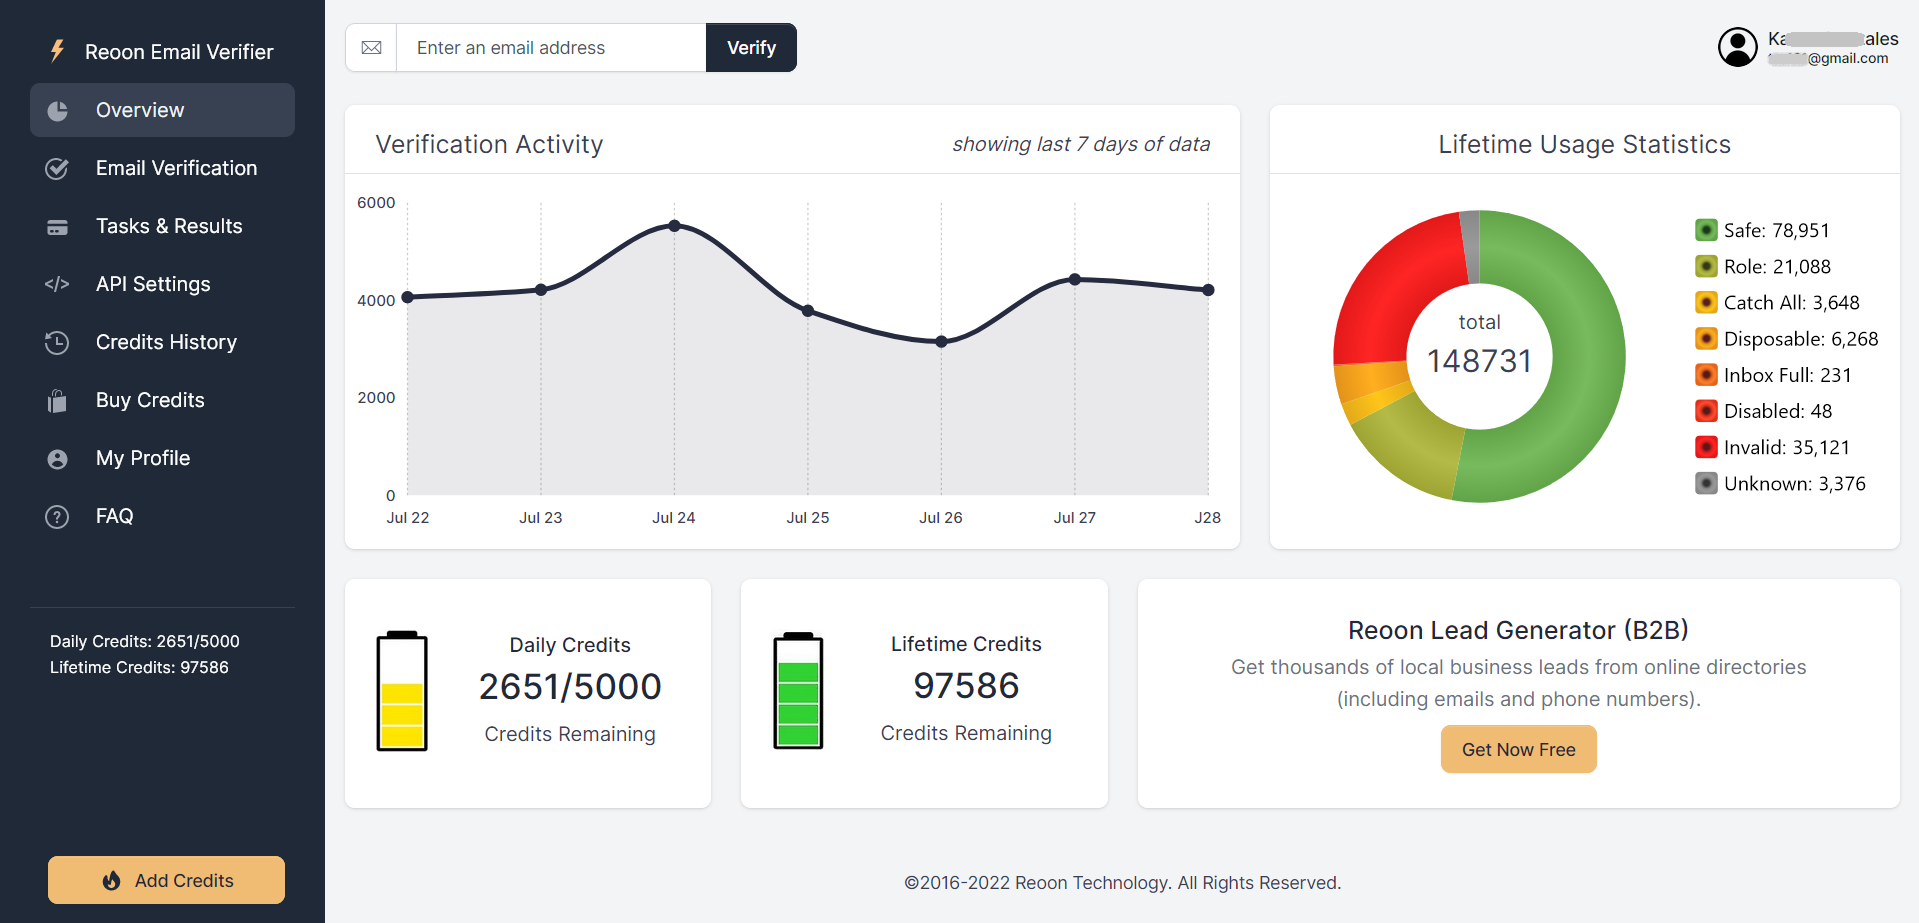 This is the dashboard where a user can find the usage details and analytics of his account. Simple and attrictrive design allows an user to check most of the things in shortest time.